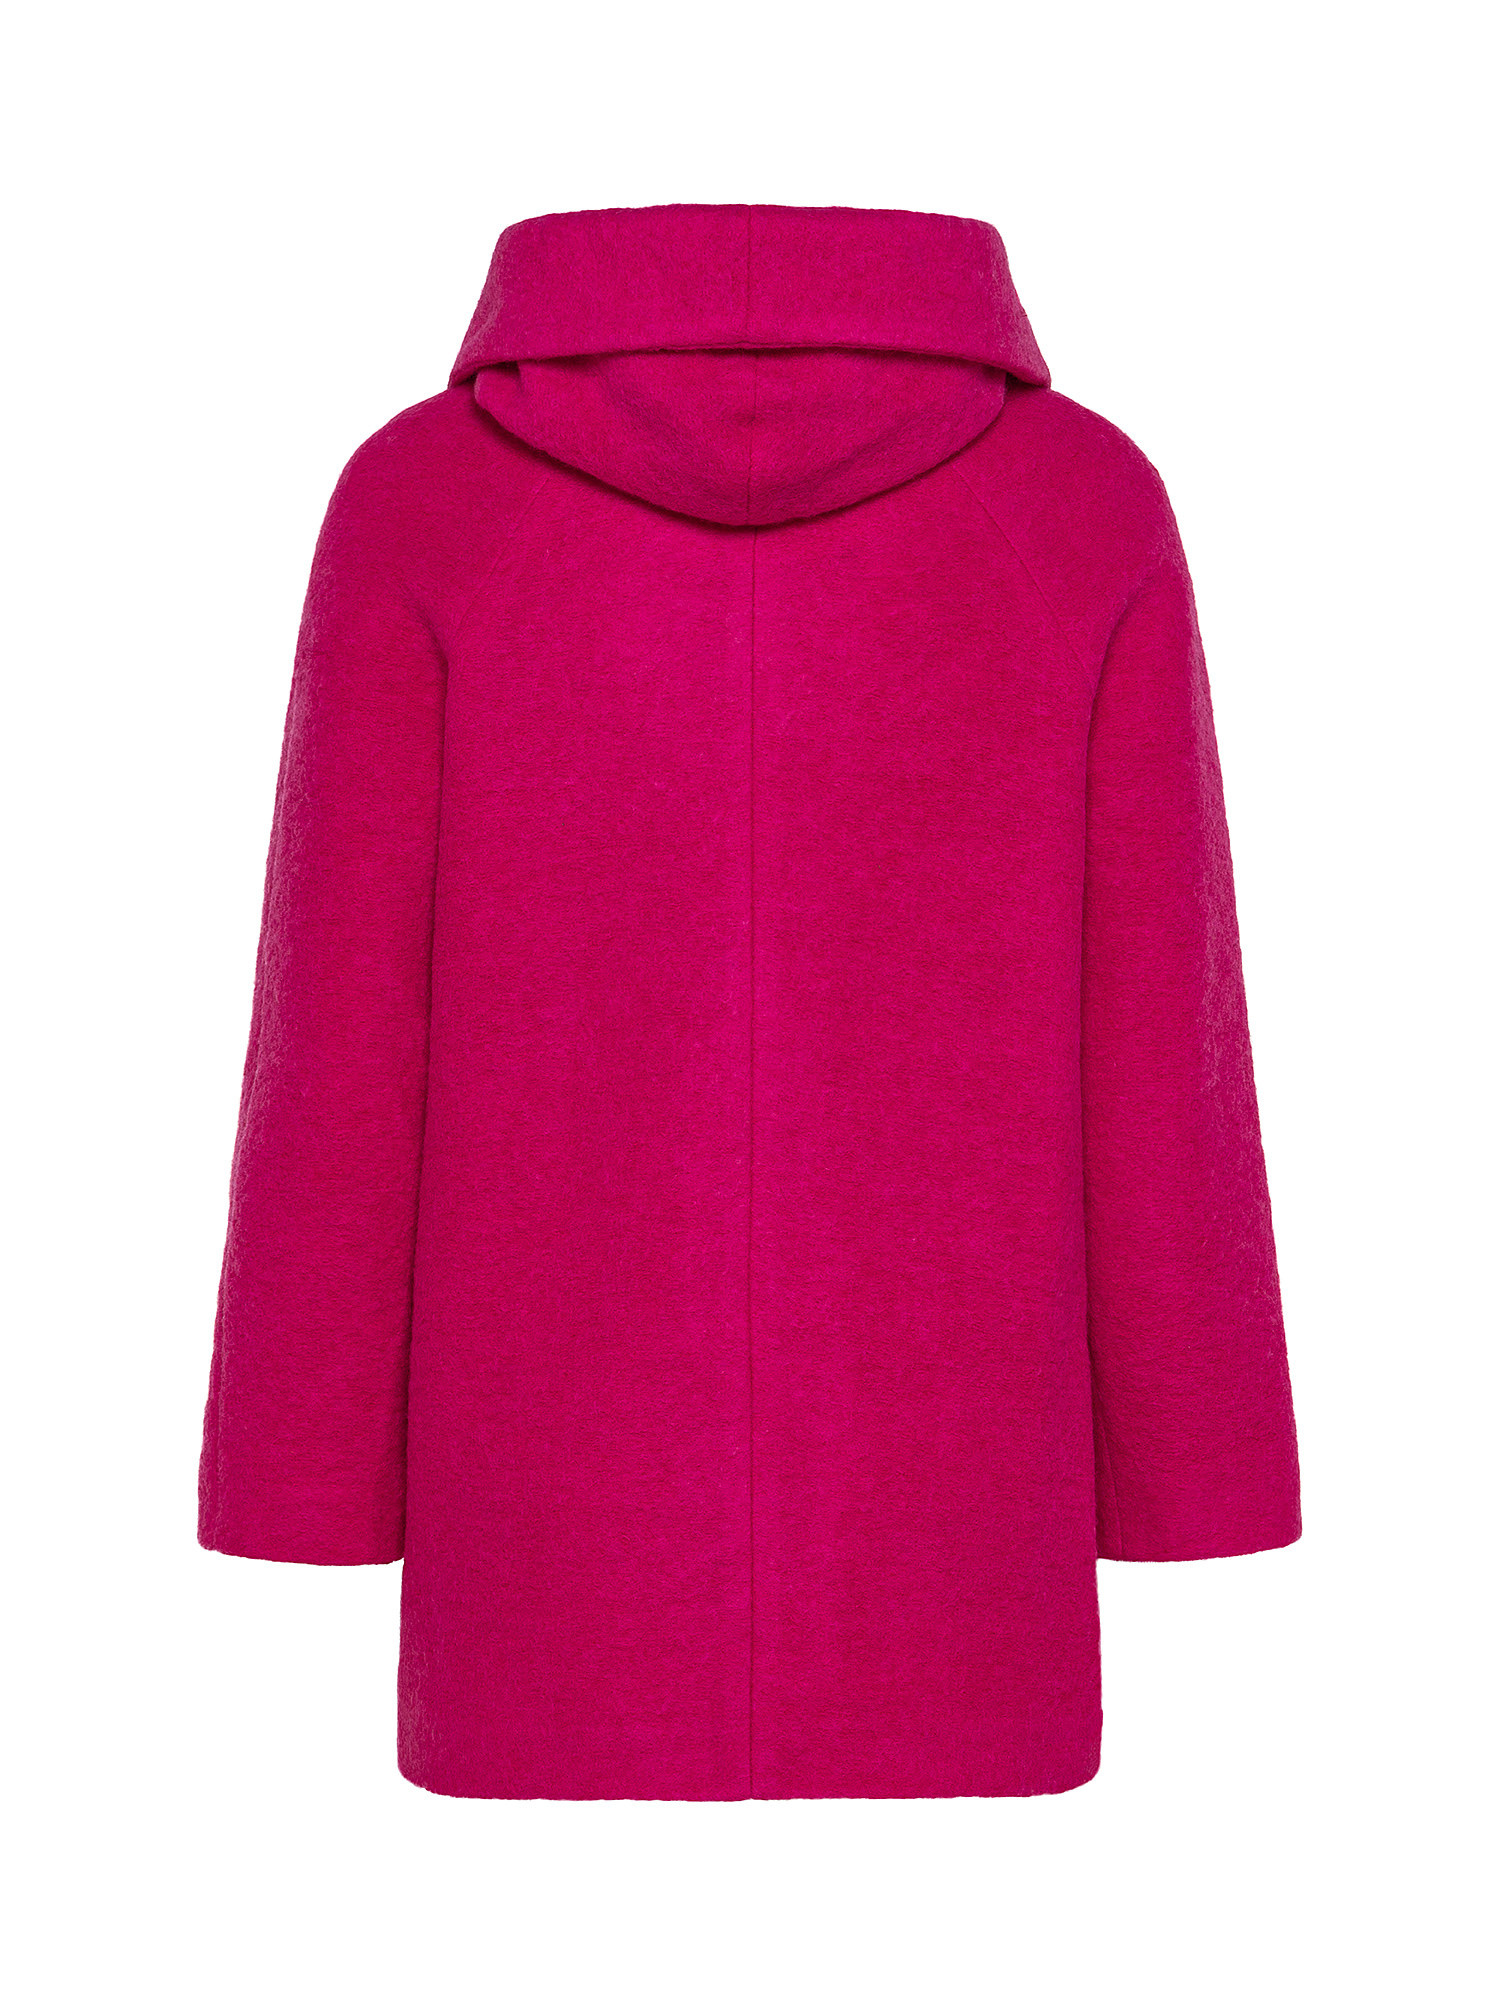 Double-breasted wool jacket, Pink Fuchsia, large image number 1